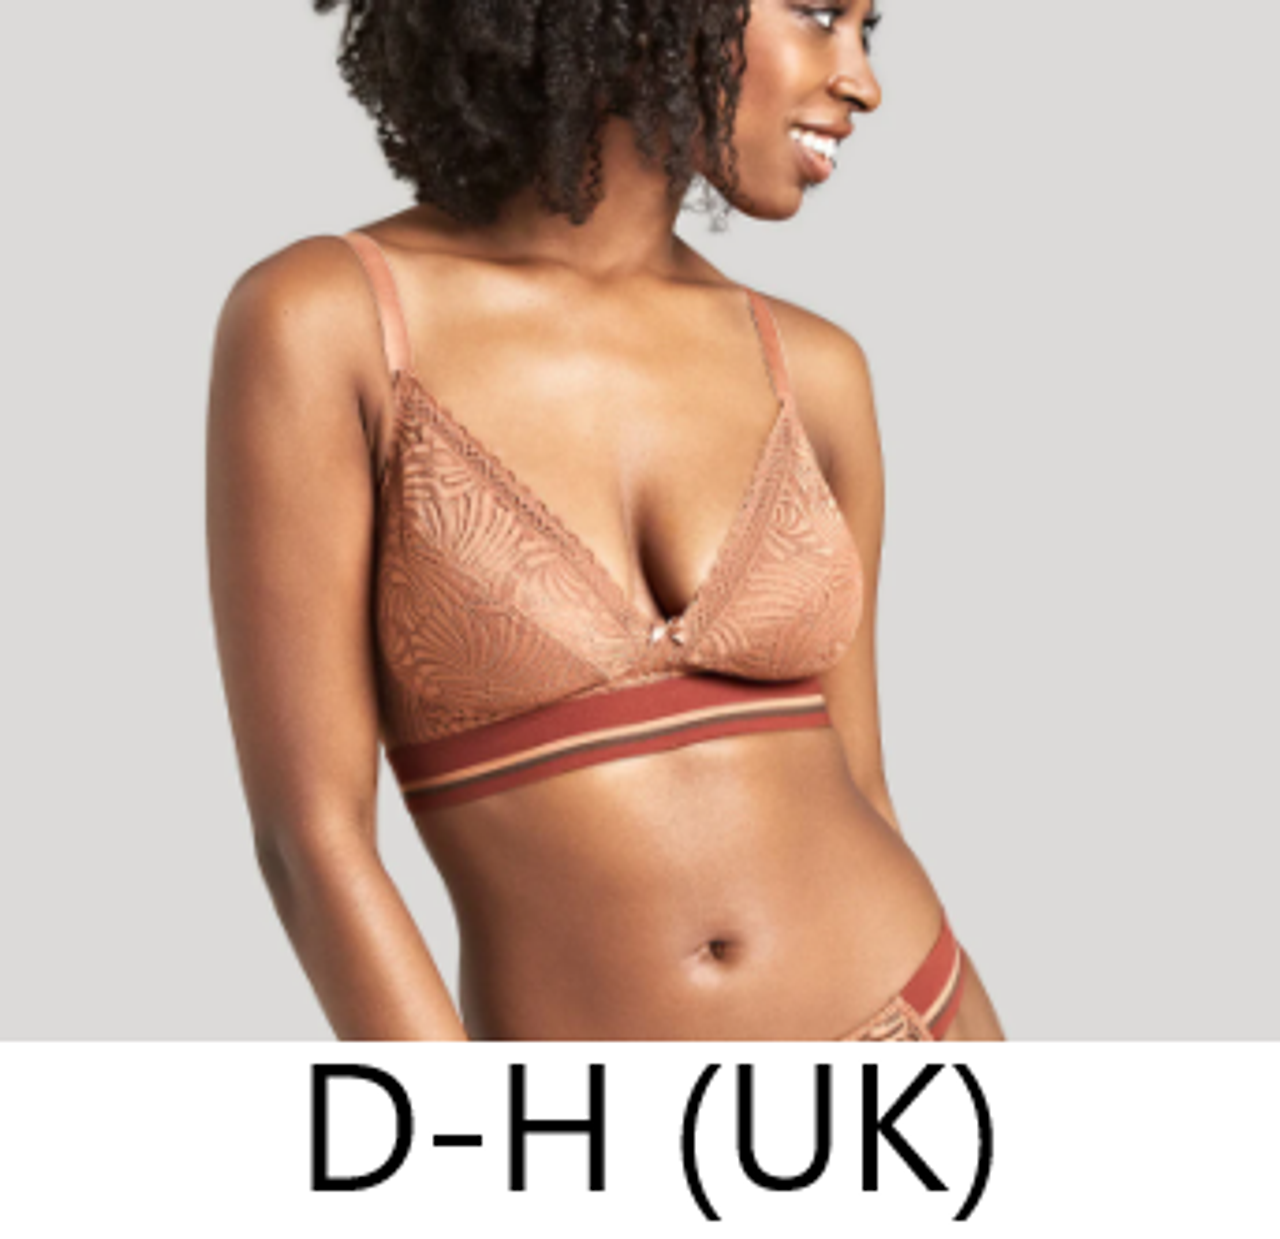 Cleo Lyzy Vibe Triangle Bralette in Caramel FINAL SALE (50% Off